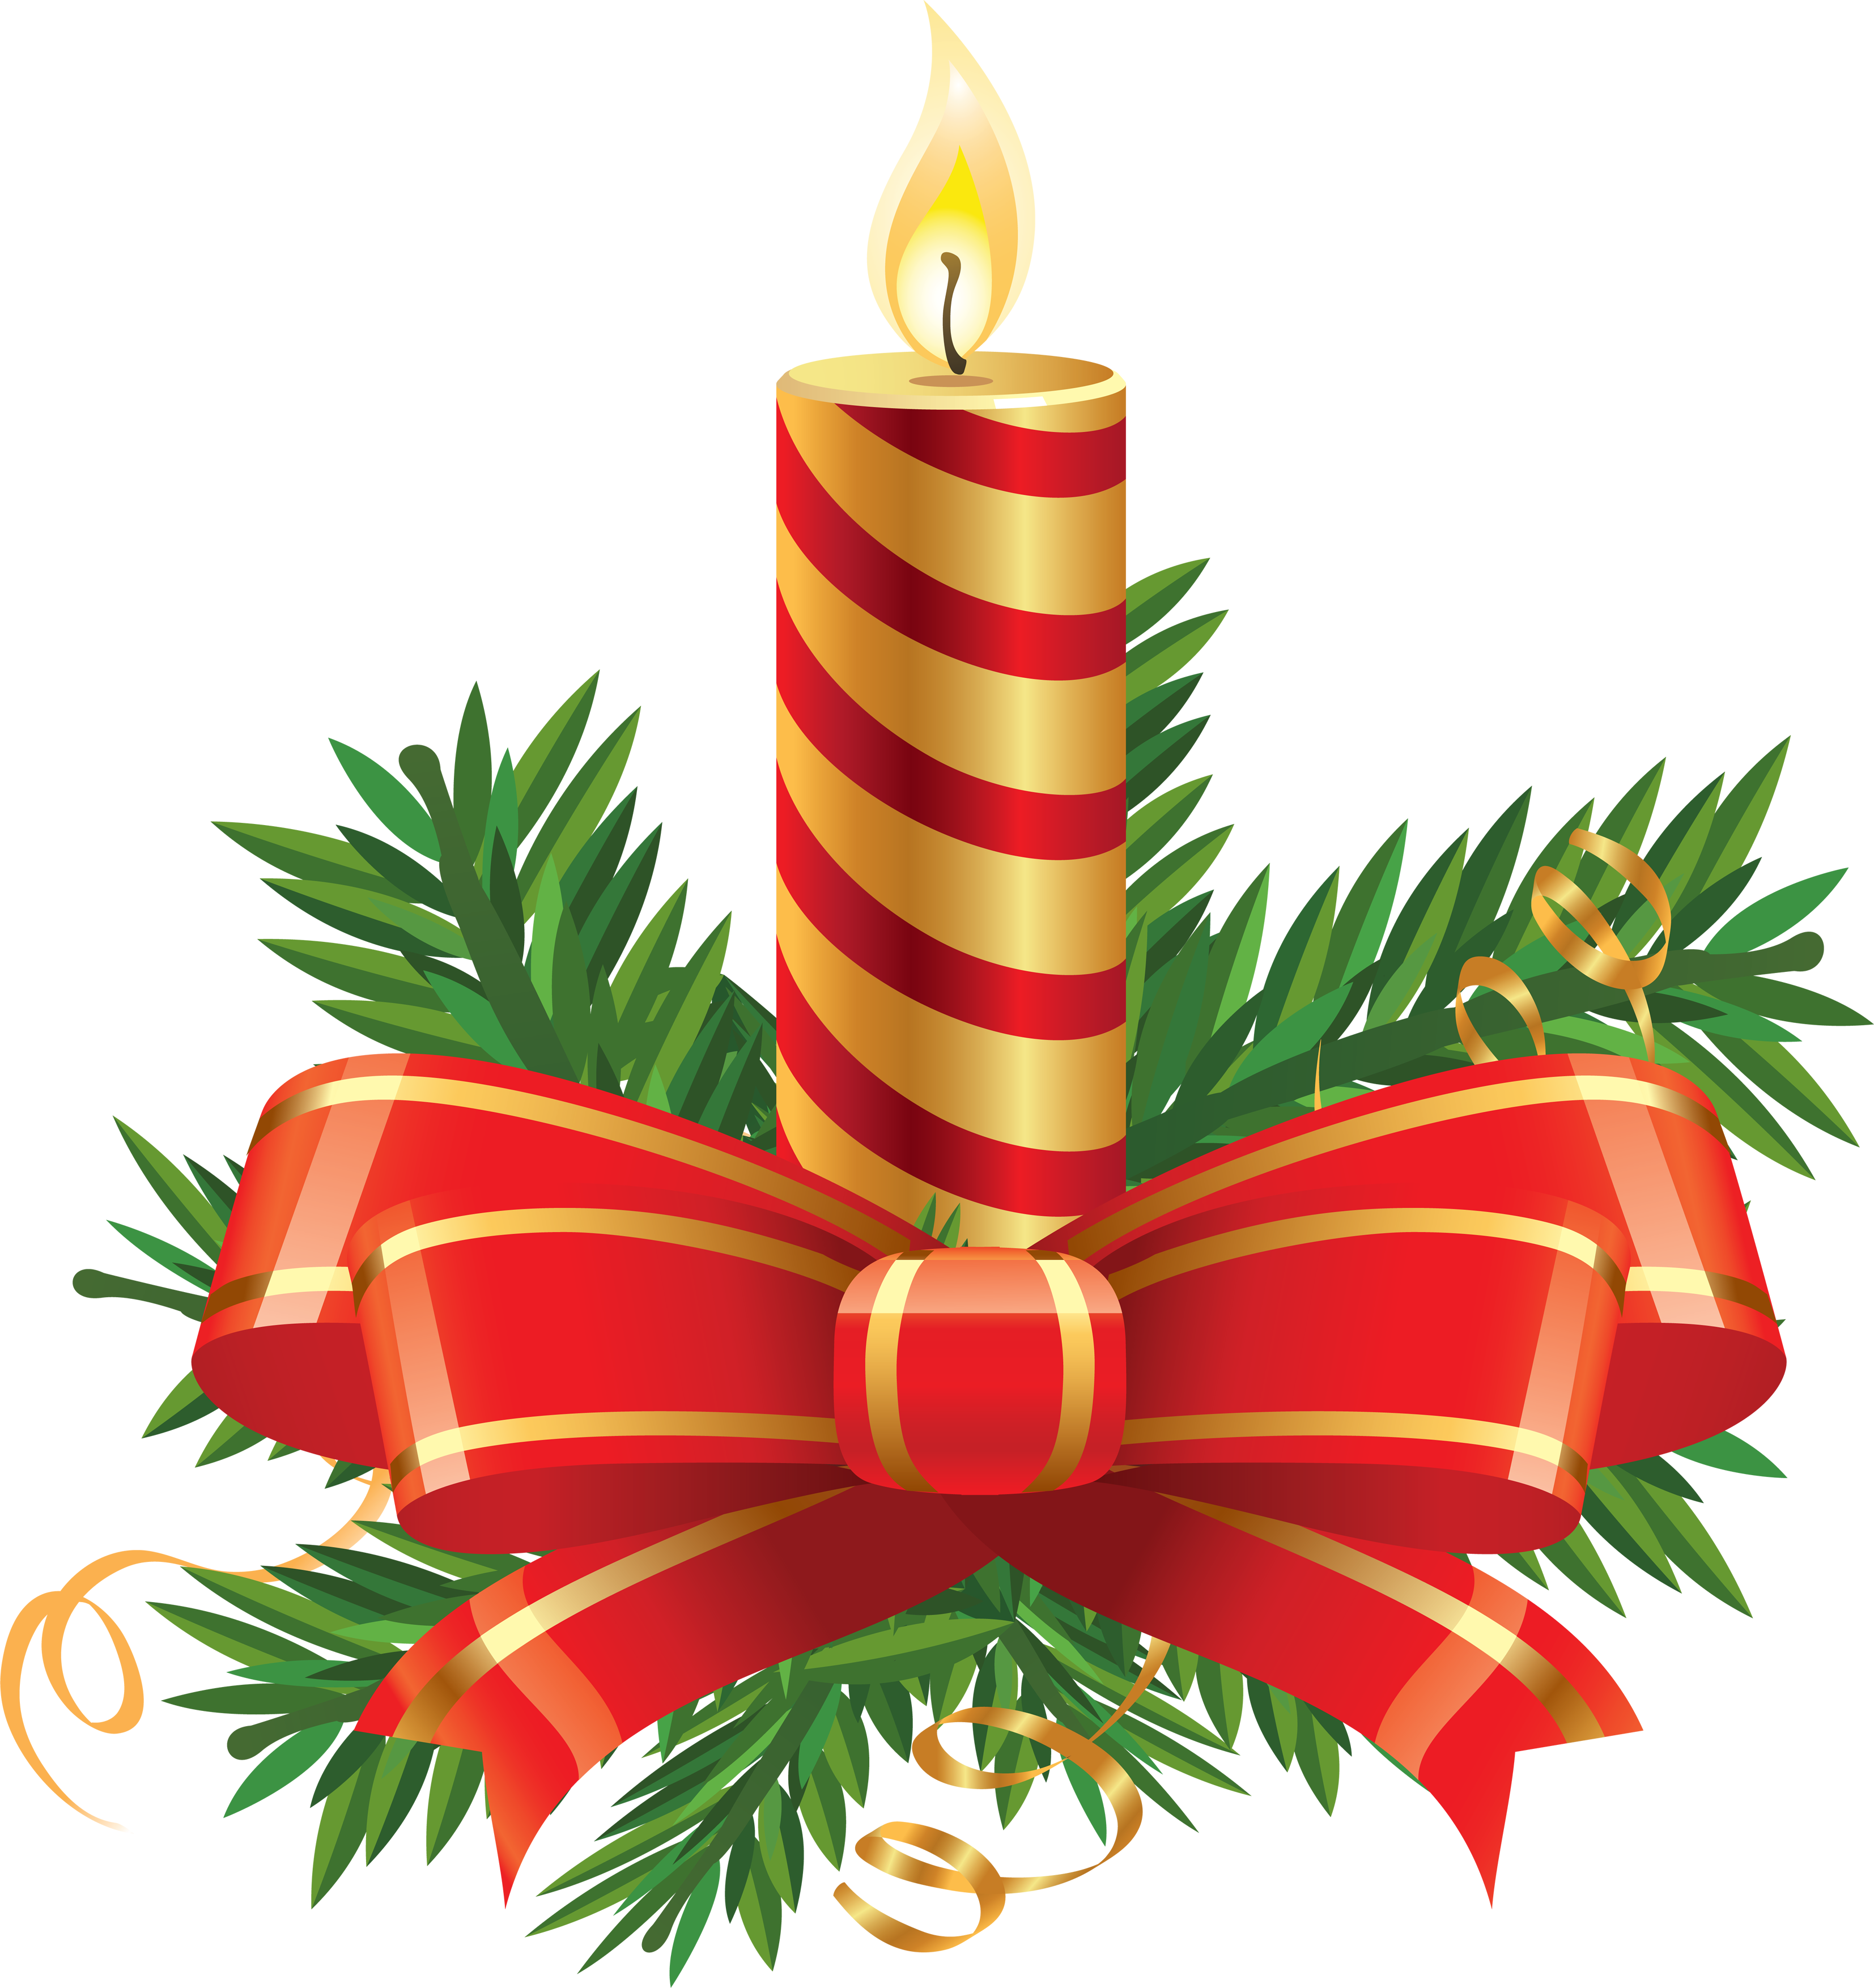 Candle Christmas Gold PNG Image High Quality PNG Image